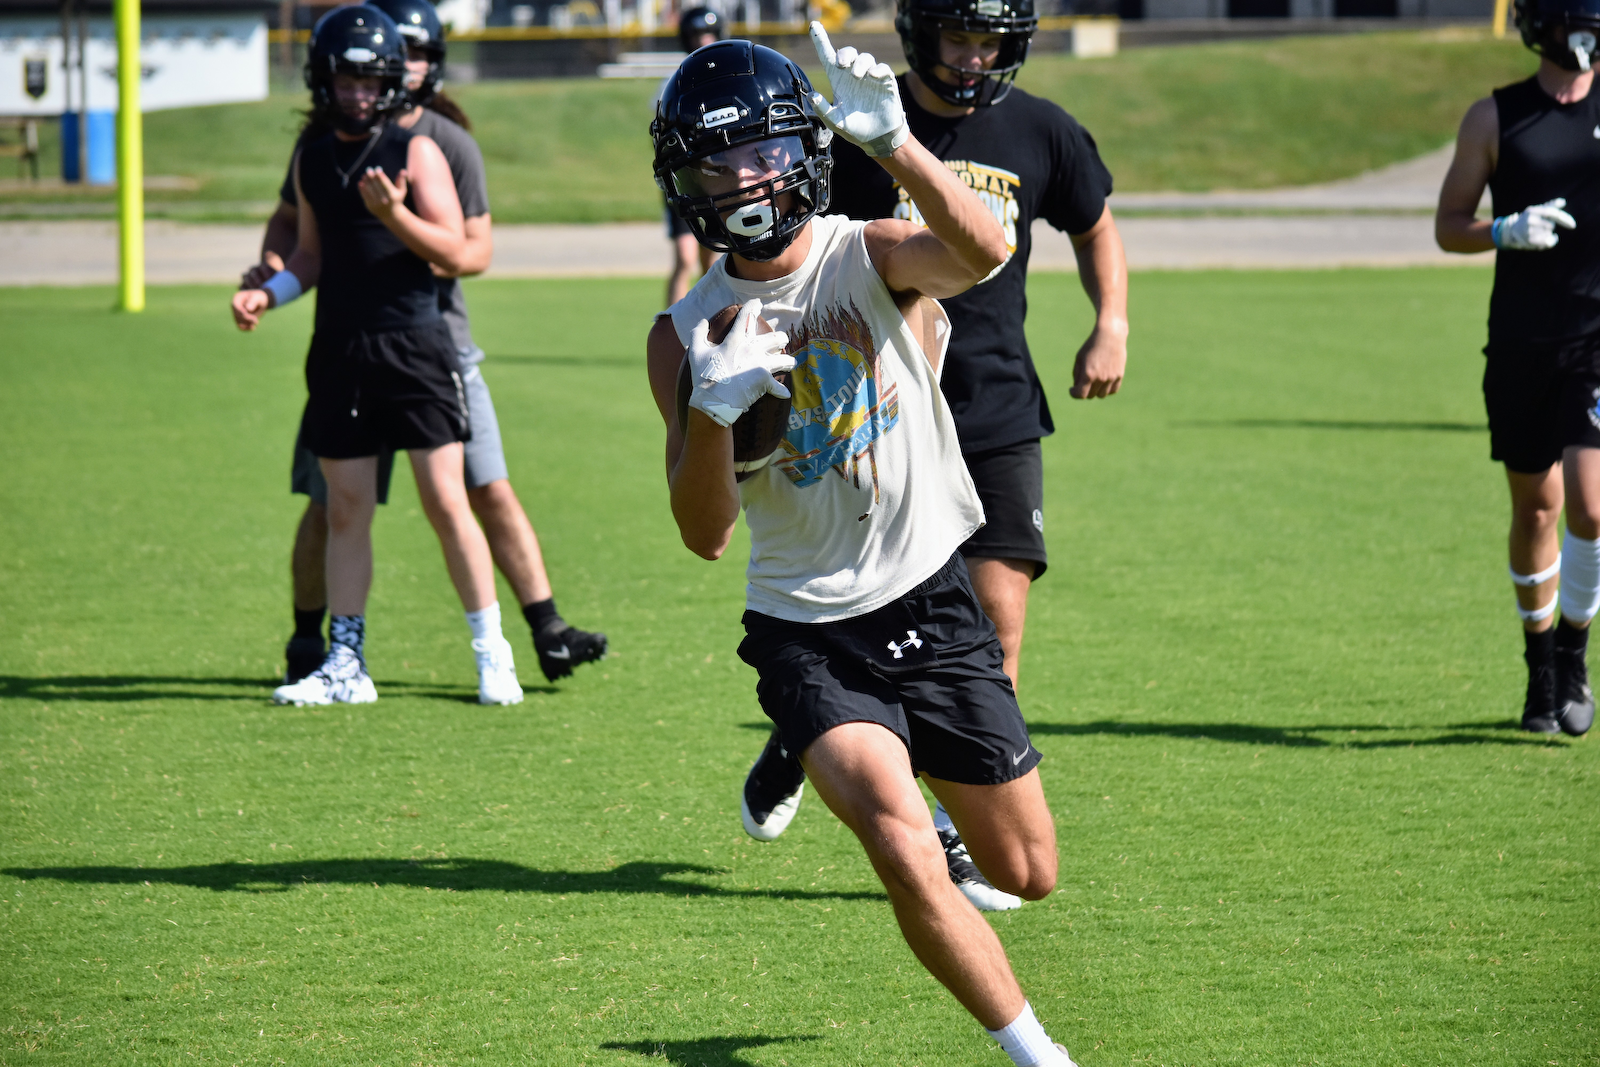 Blackhawk football looks to build on momentum in 2022 cover photo